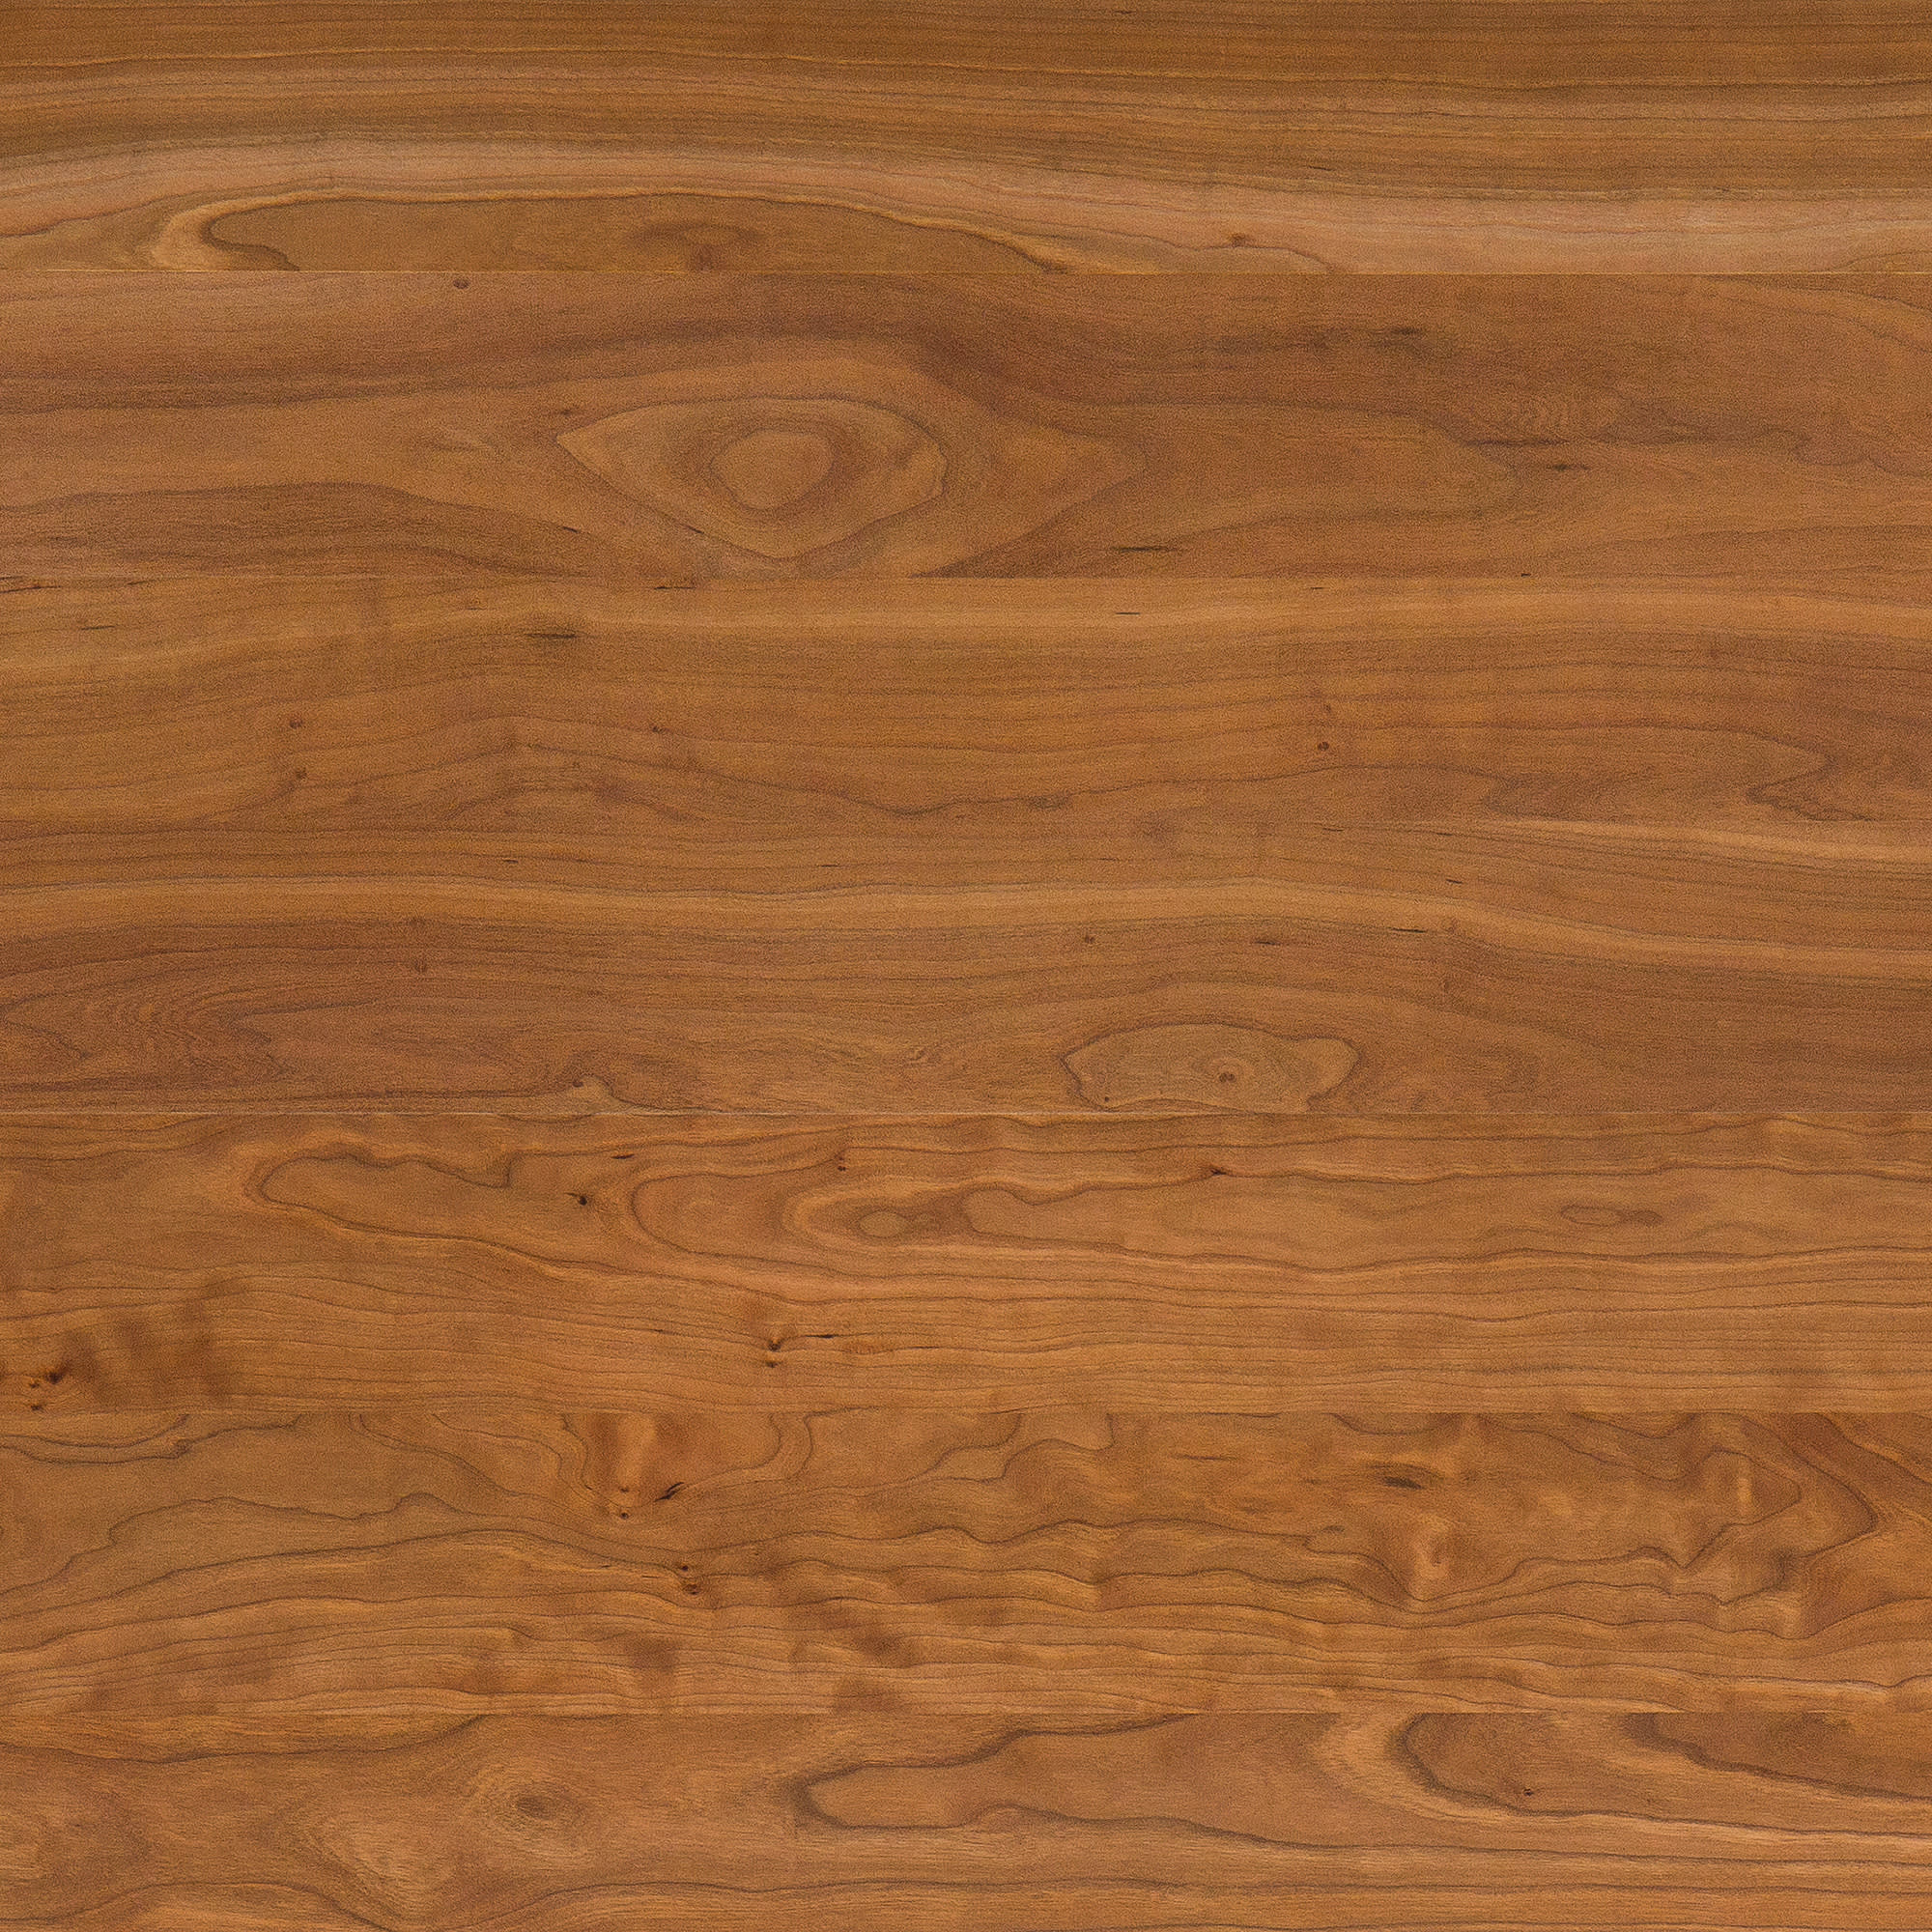 The Best Types of Wood for Furniture, Flooring, and Cabinets